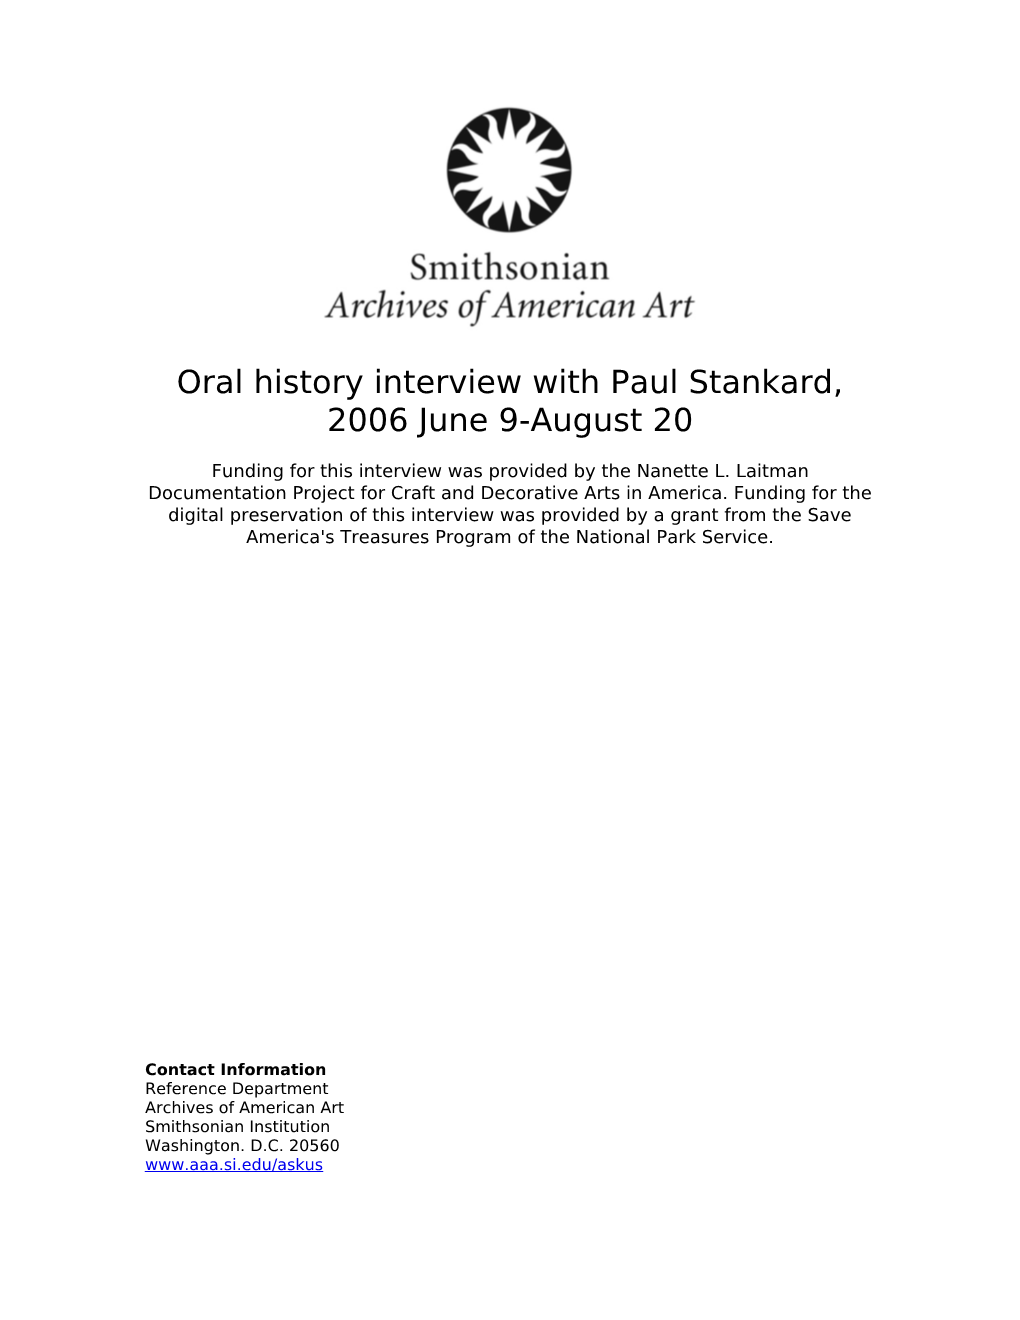 Oral History Interview with Paul Stankard, 2006 June 9-August 20